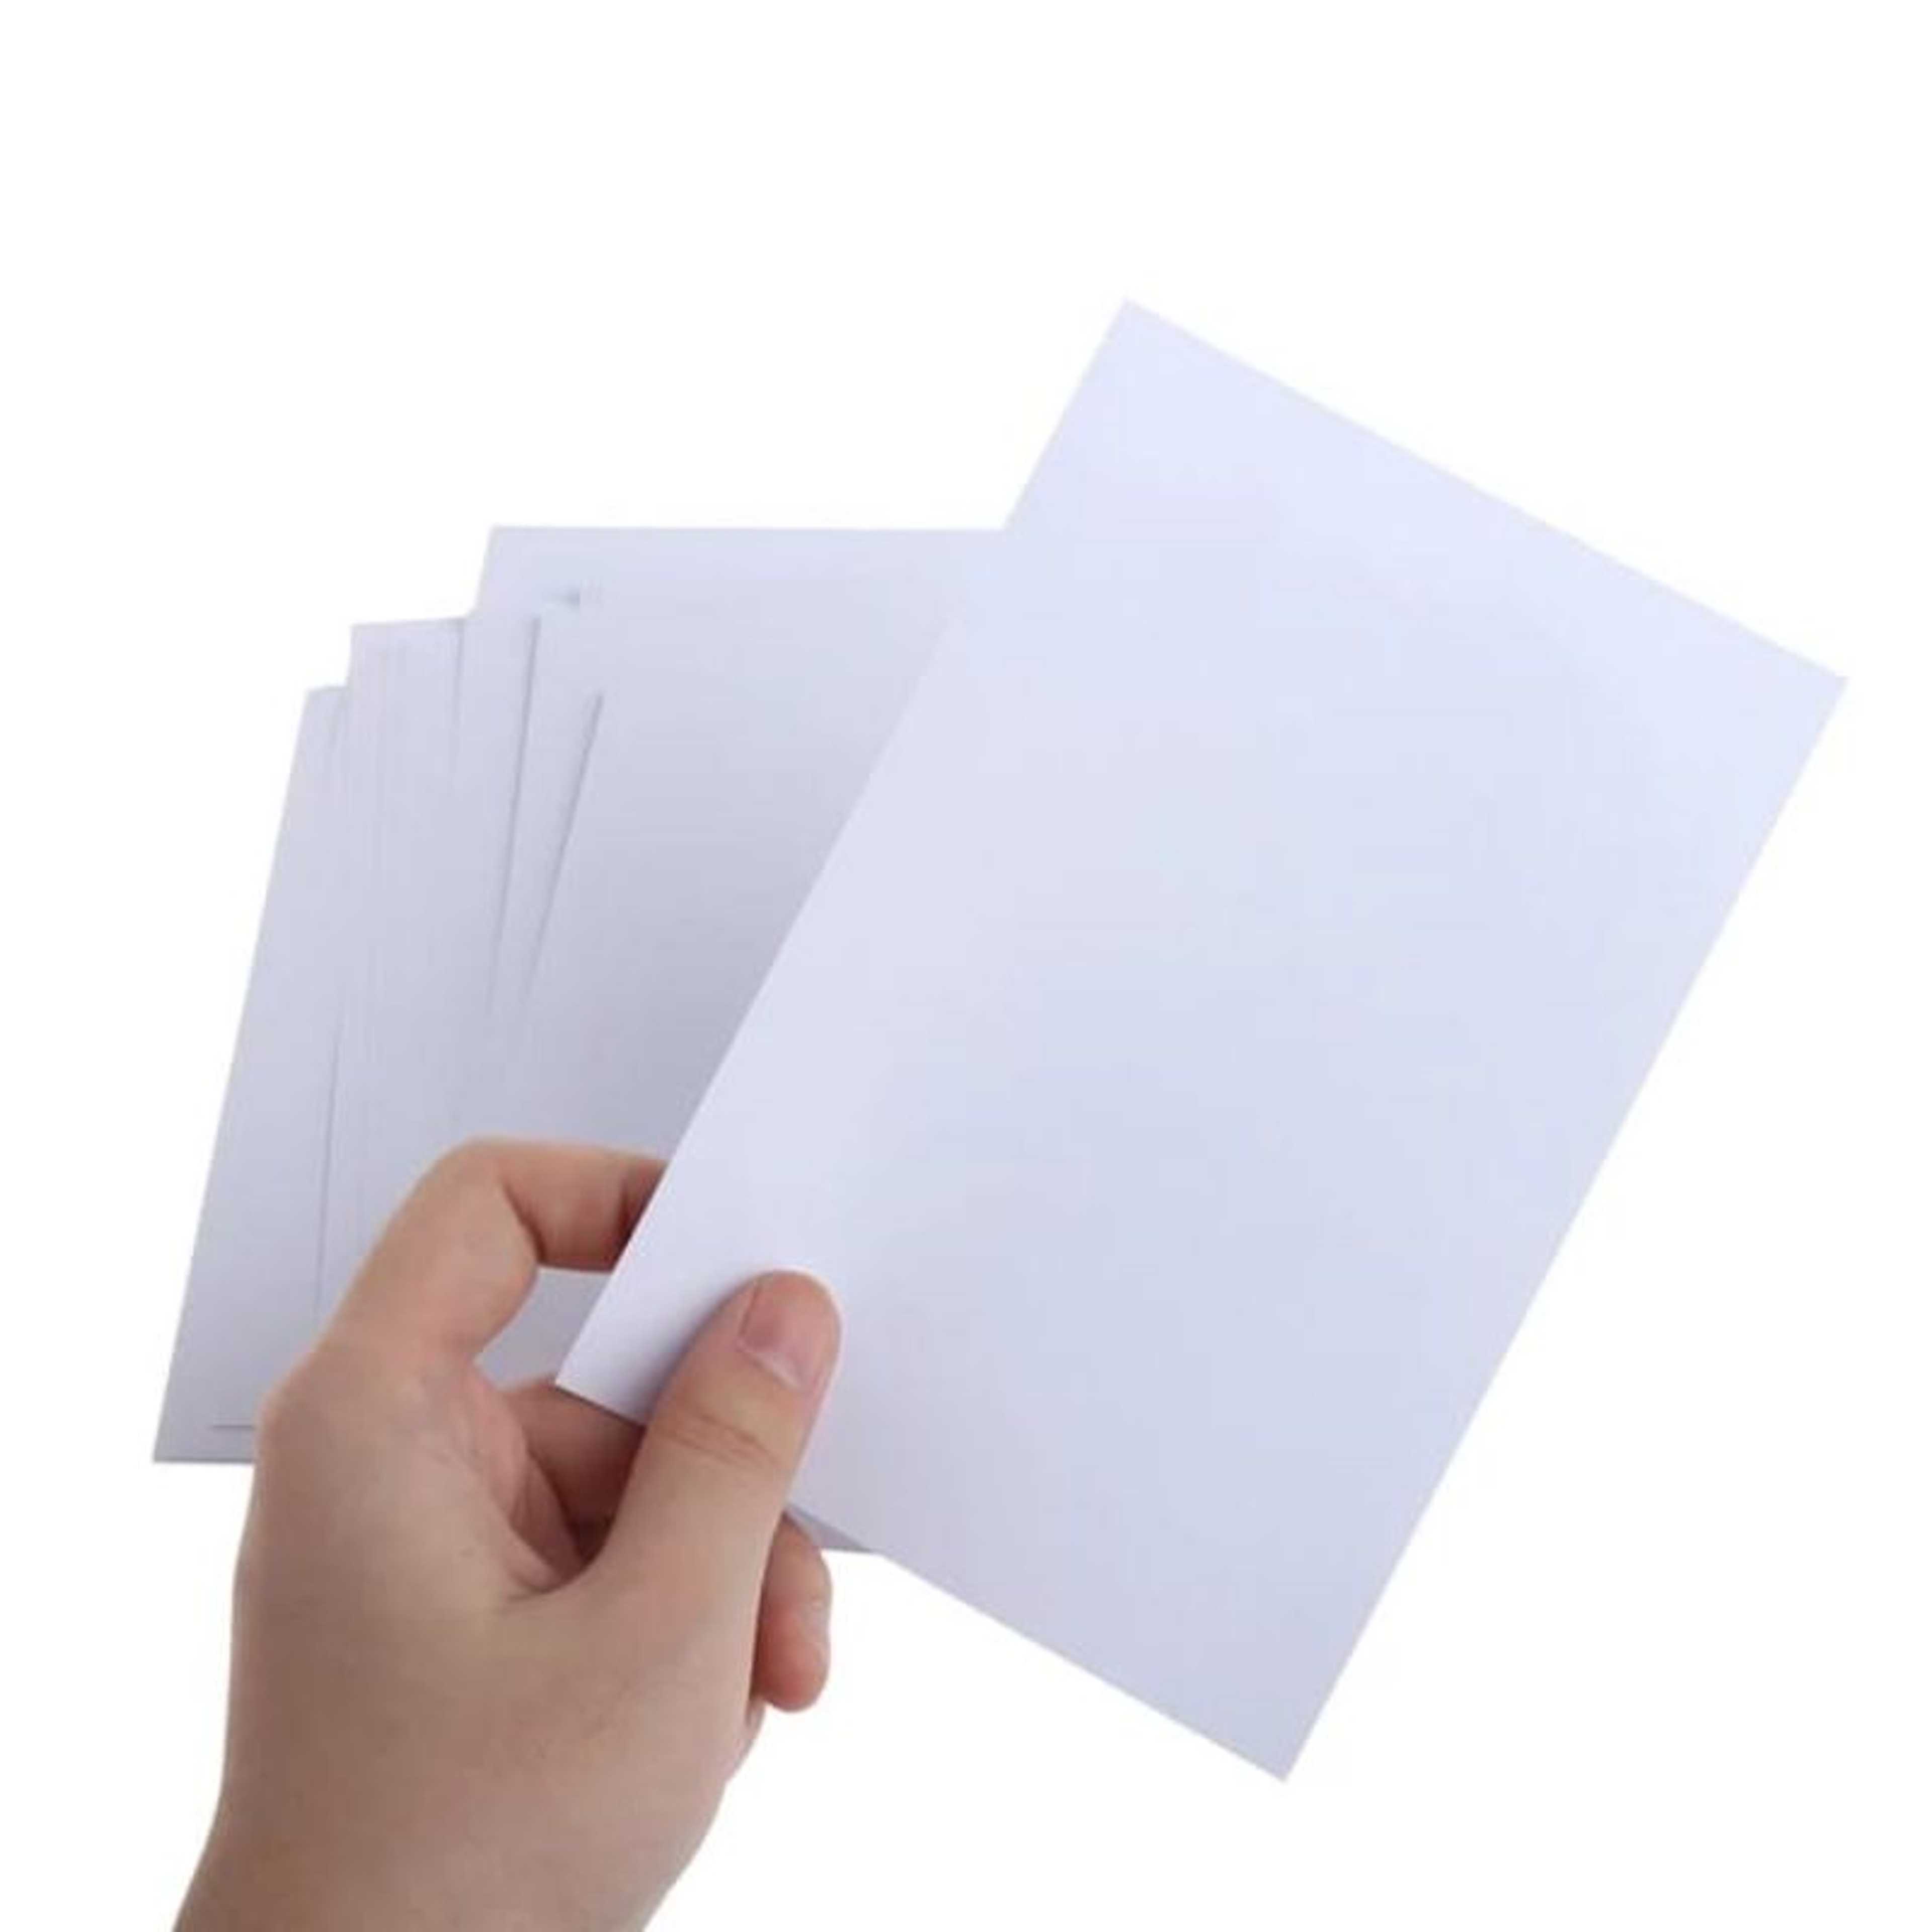 Pack of 20 - Waterproof Inkjet Glossy Photo Paper A4 Size Sheets For All Inkjet Printers